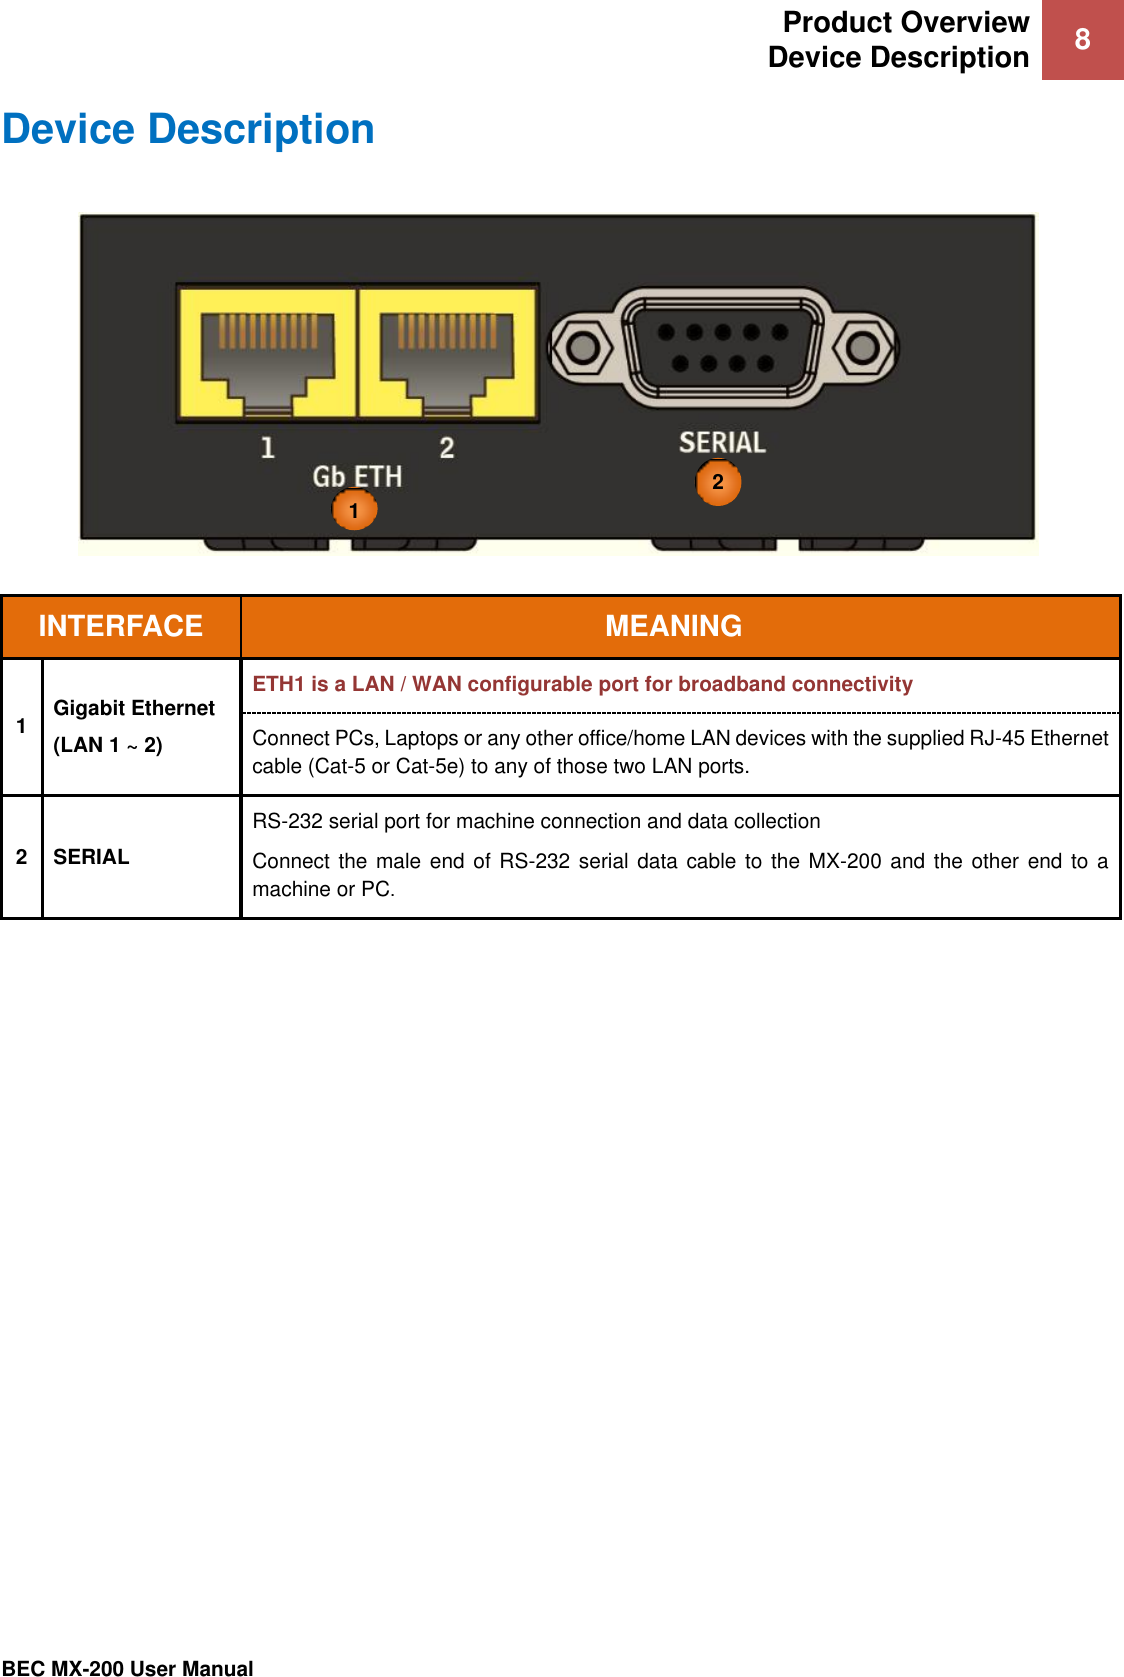 Product Overview Device Description 8   BEC MX-200 User Manual  Device Description  INTERFACE MEANING 1 Gigabit Ethernet (LAN 1 ~ 2) ETH1 is a LAN / WAN configurable port for broadband connectivity Connect PCs, Laptops or any other office/home LAN devices with the supplied RJ-45 Ethernet cable (Cat-5 or Cat-5e) to any of those two LAN ports.  2 SERIAL  RS-232 serial port for machine connection and data collection Connect the male end of RS-232 serial data cable to the MX-200  and the  other end to a machine or PC. 2 11 